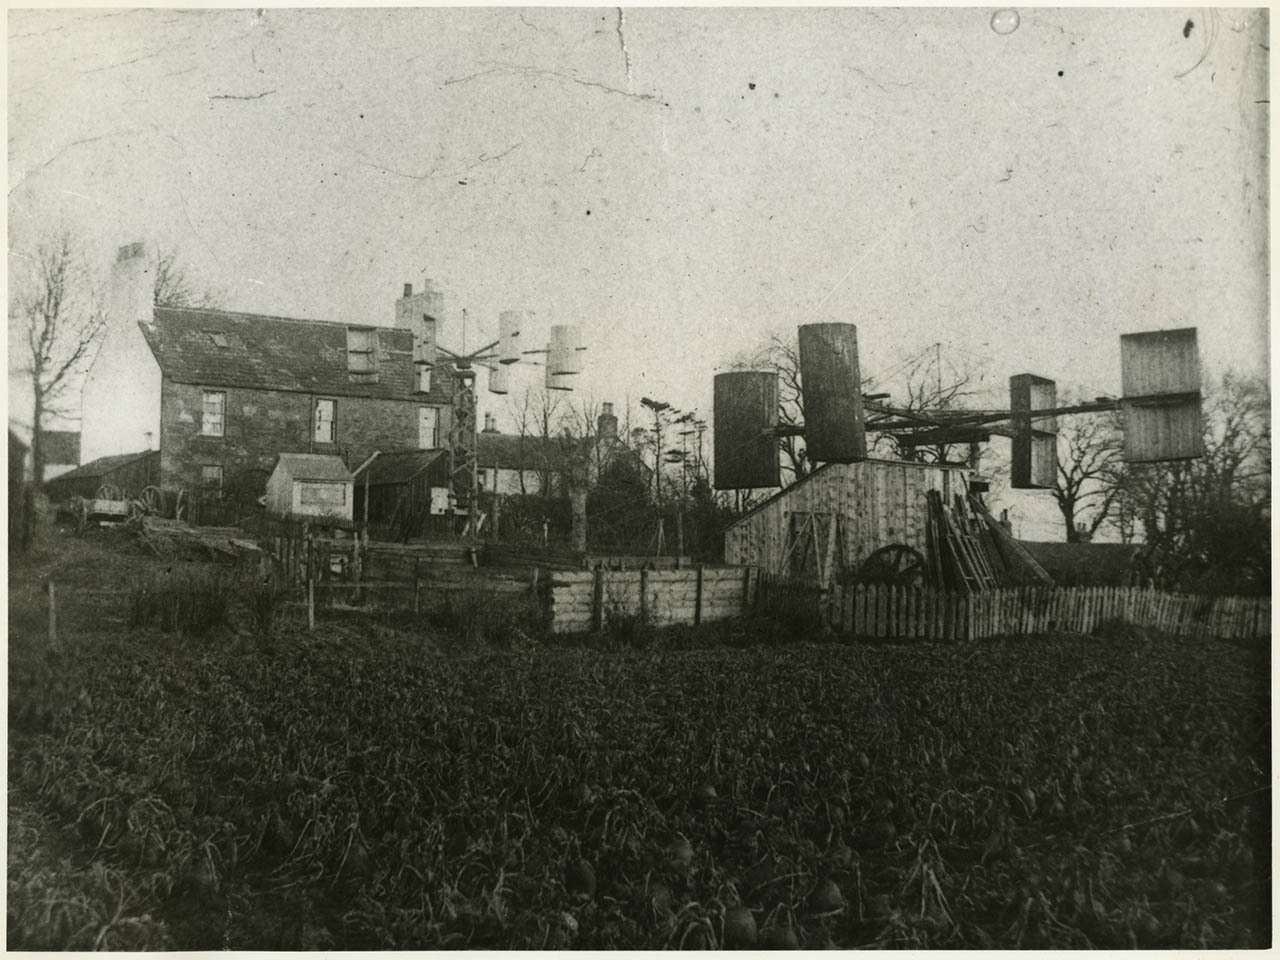 Two windmills erected in the garden of James Blyth’s cottage at Marykirk, c.1892 